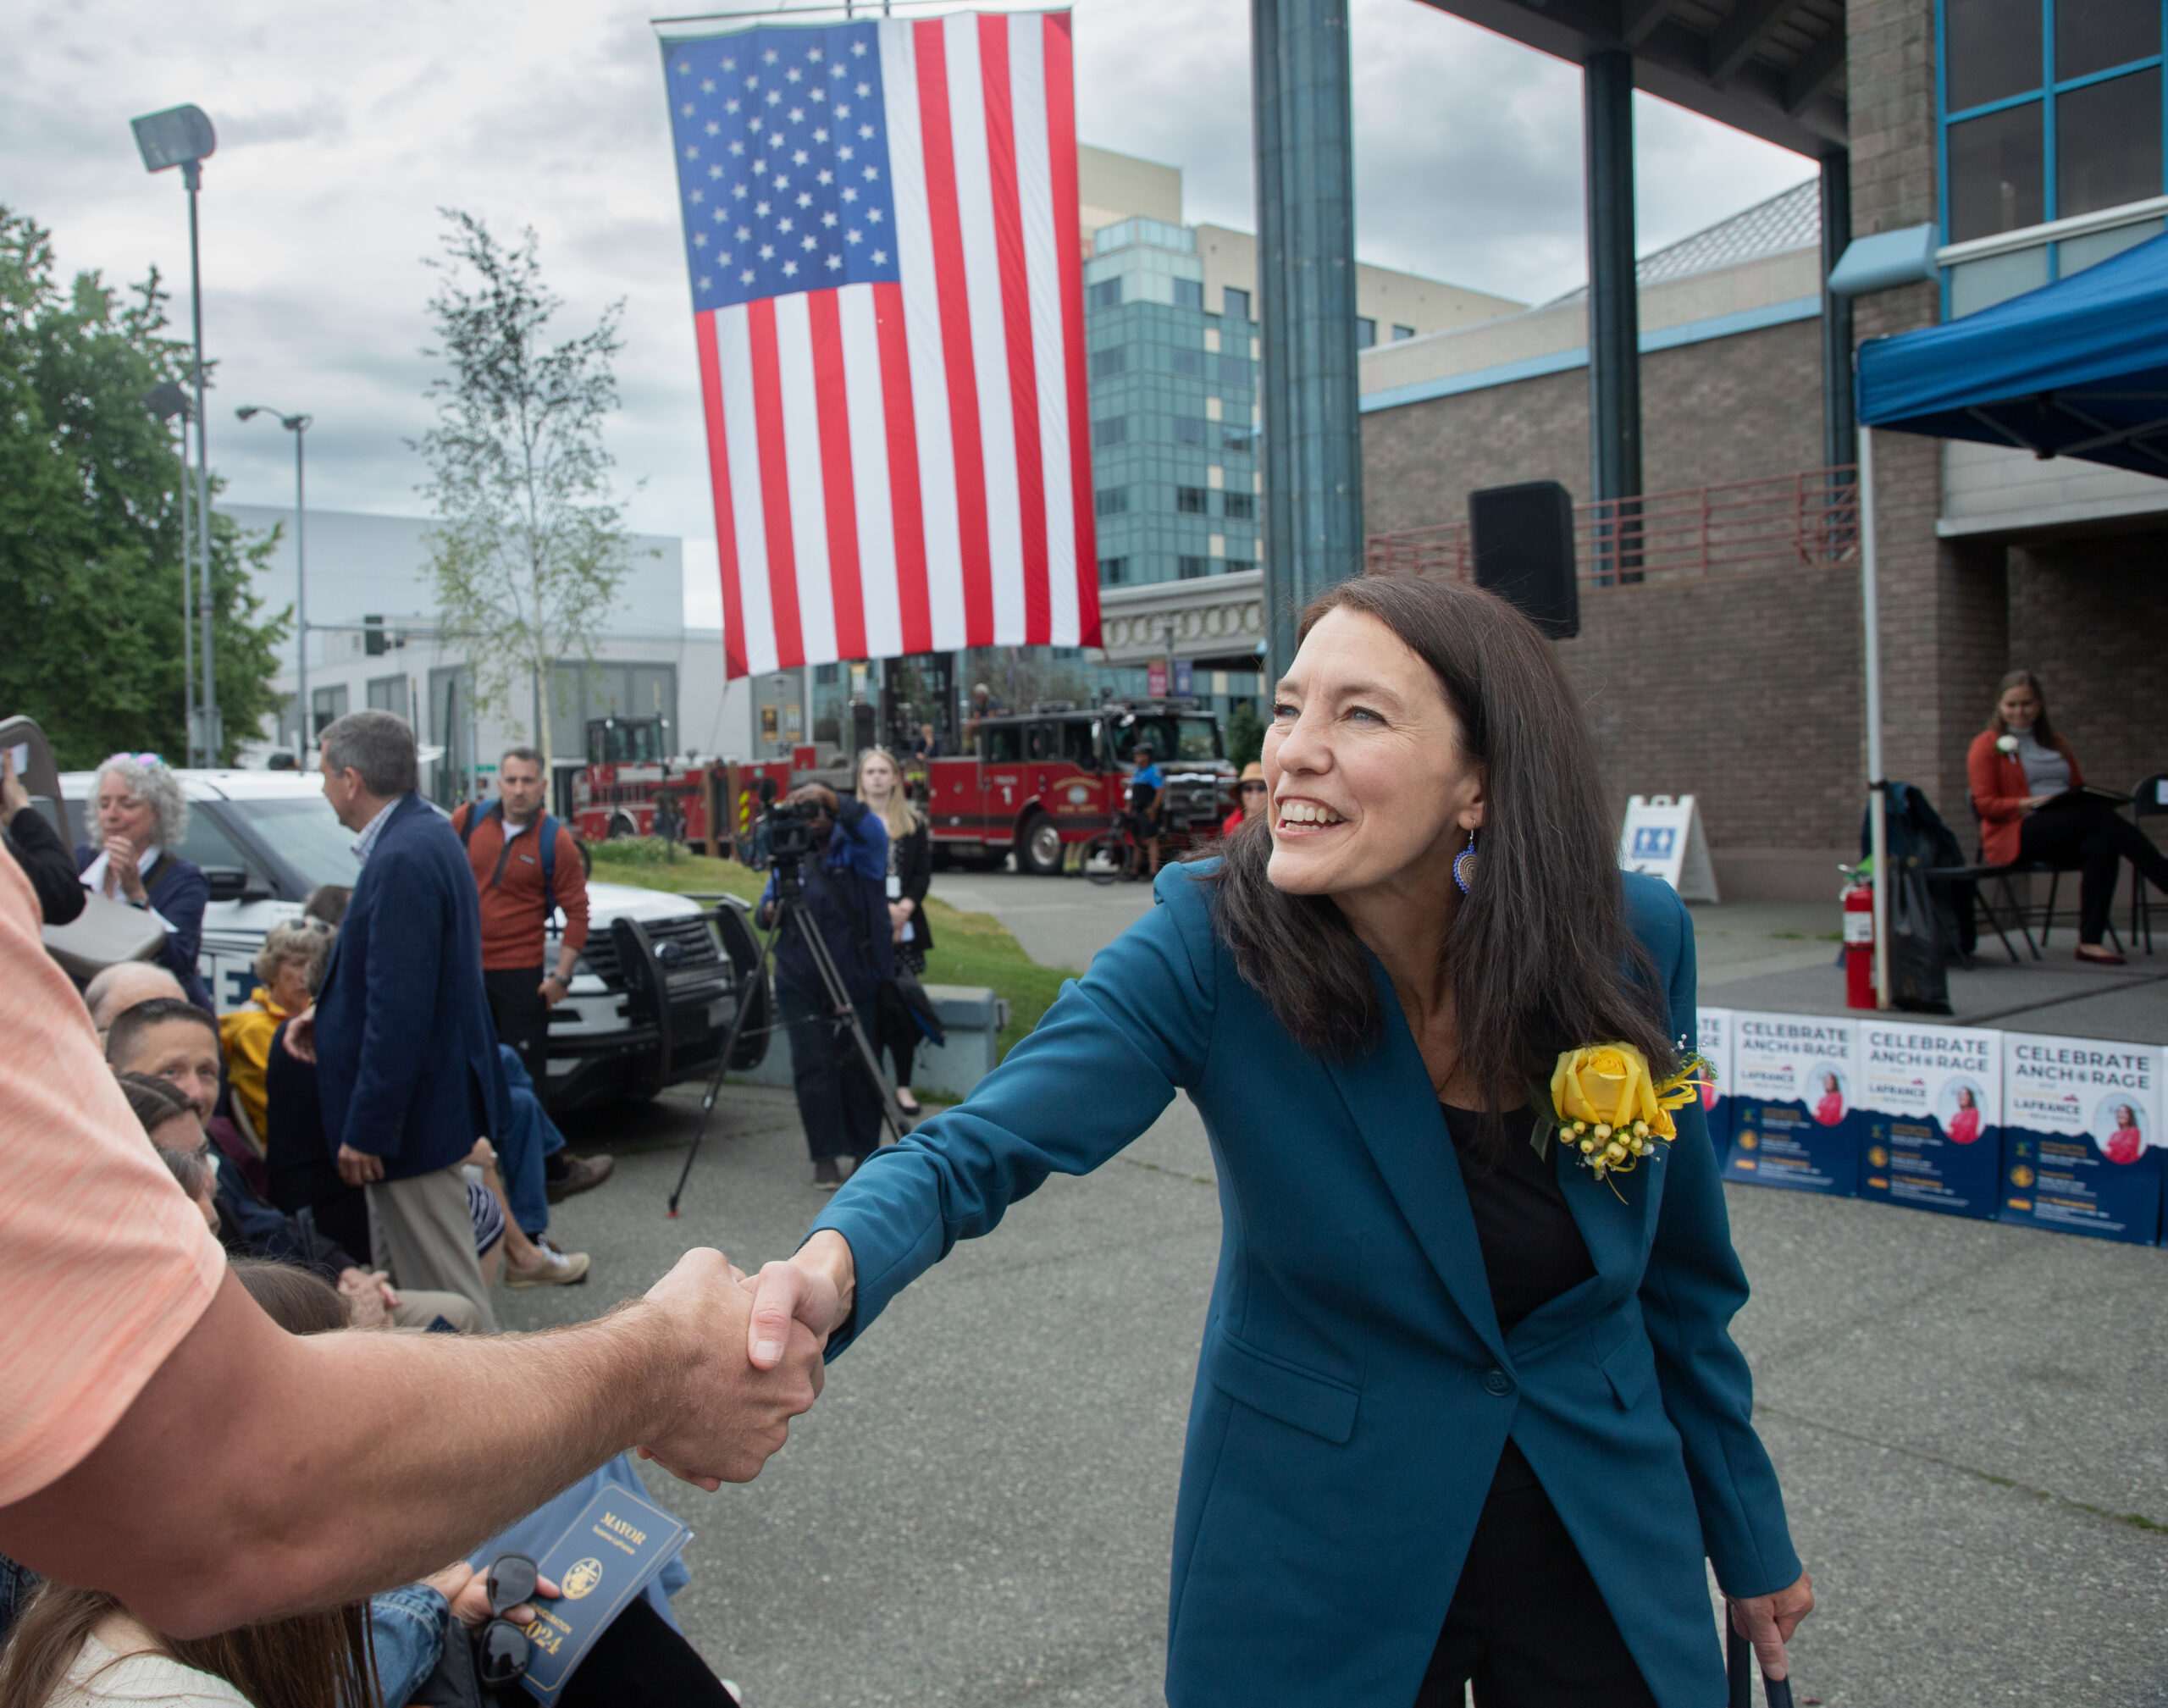 A woman in a blue suit shakes hands with people.